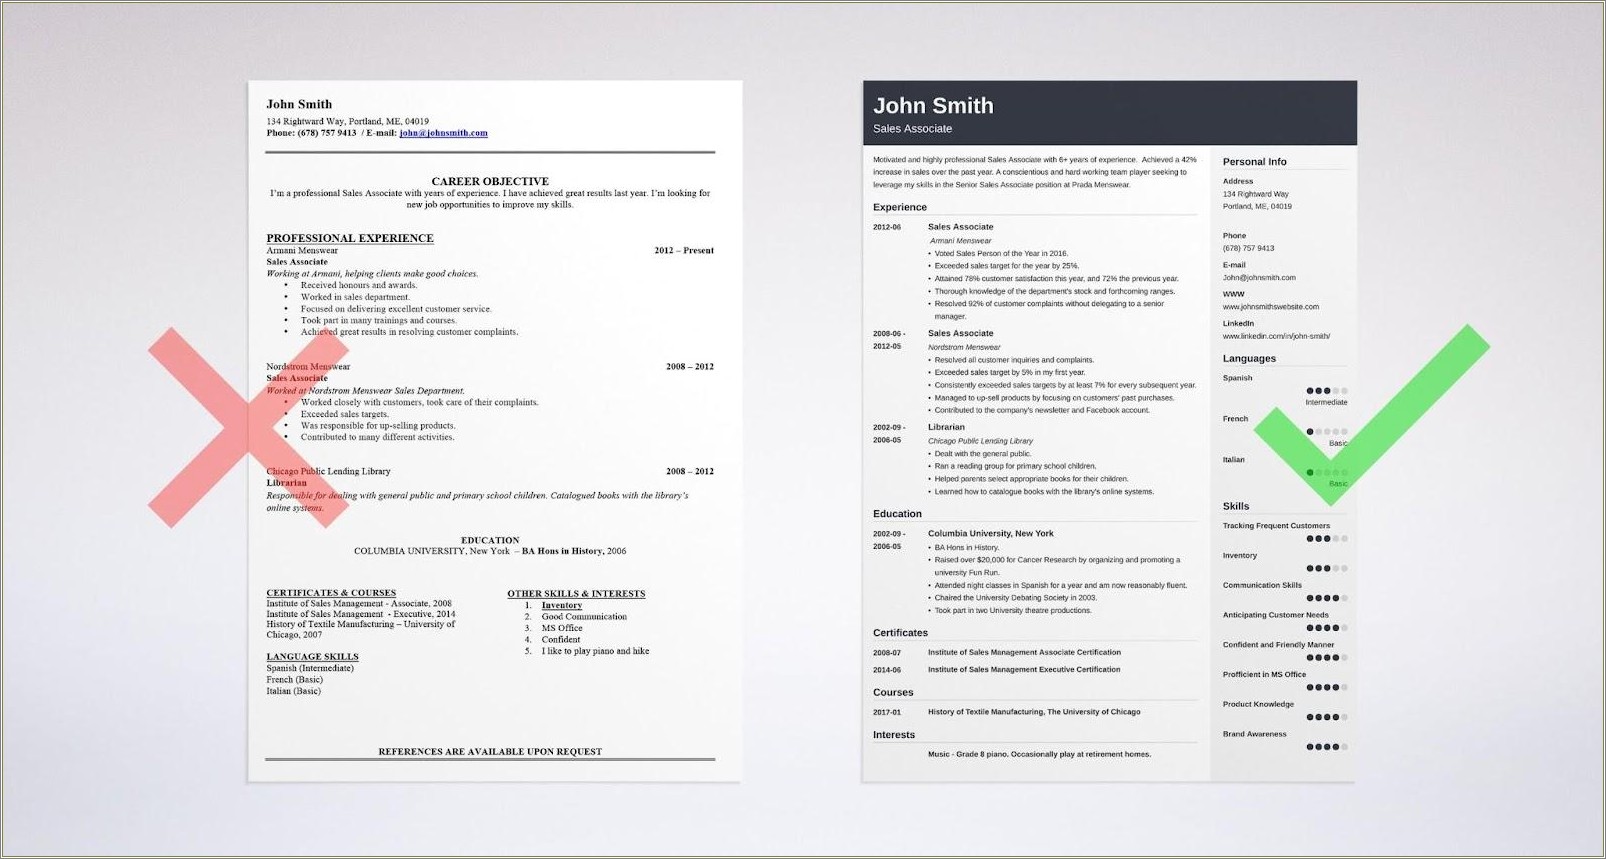 Best Way To Layout Your Resume